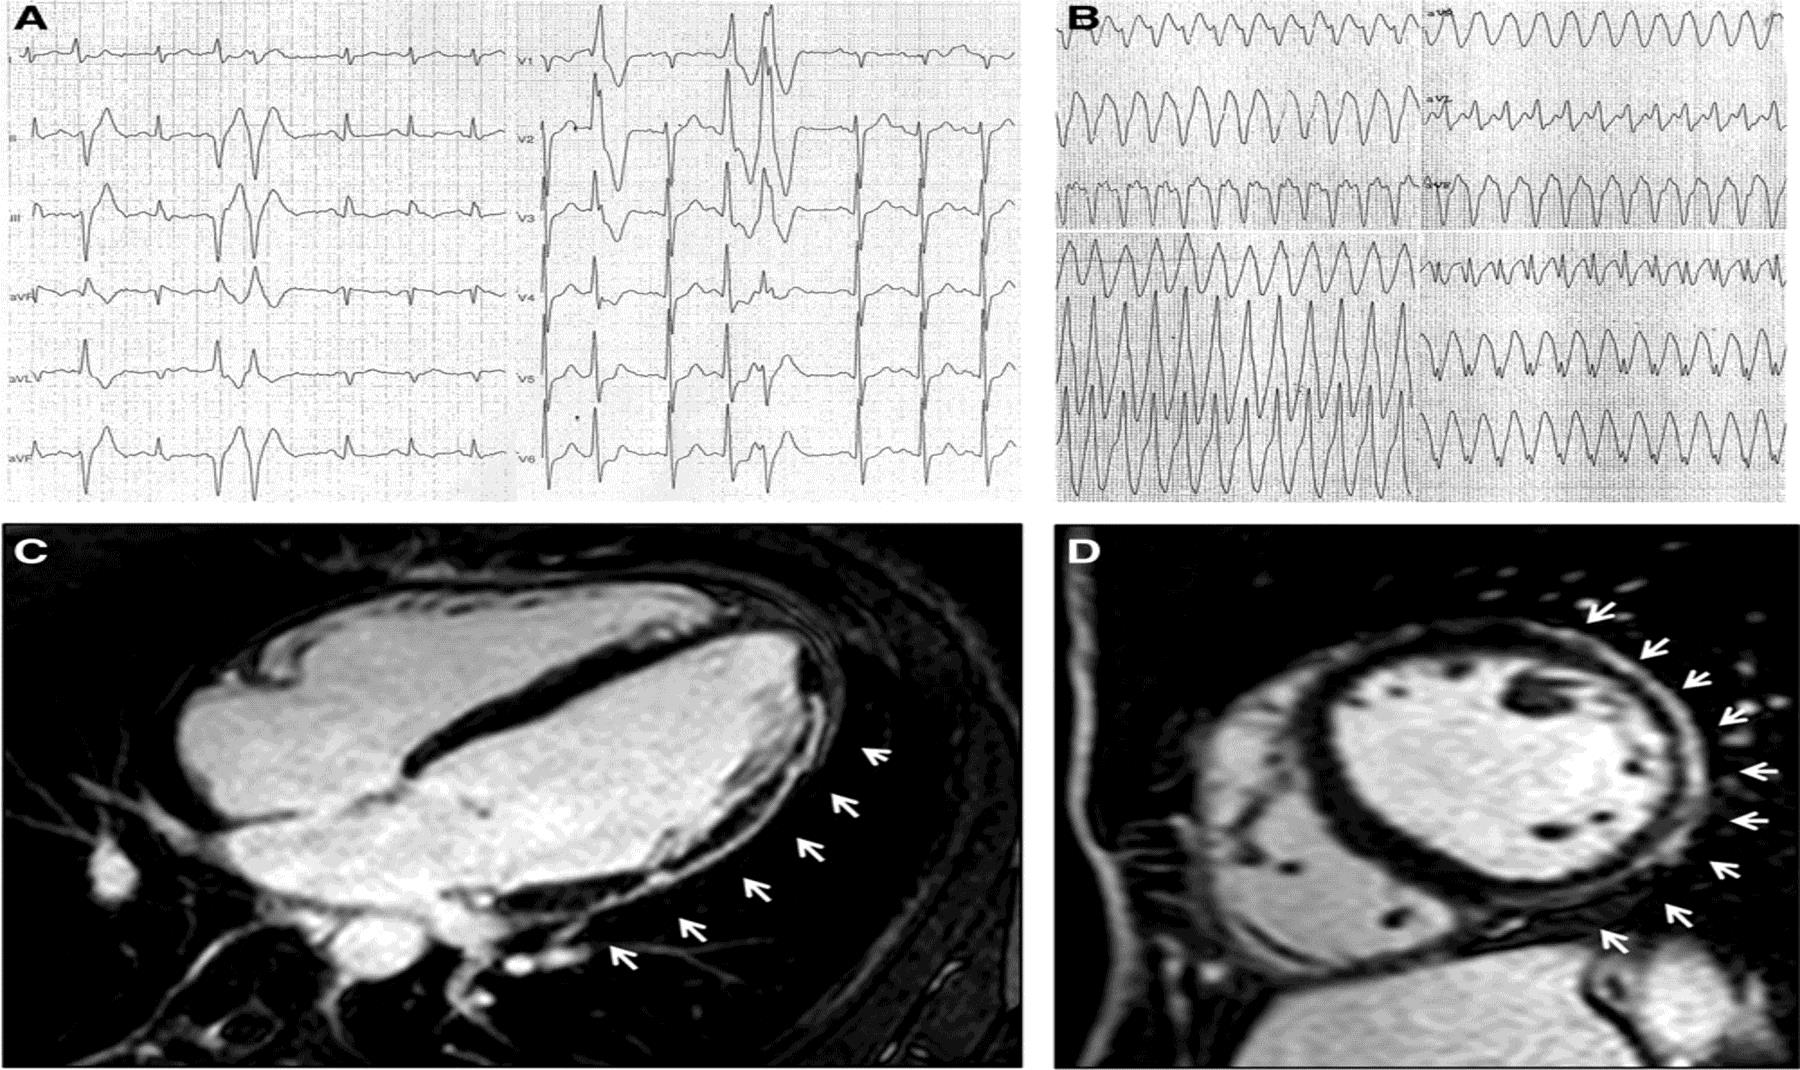 42-y-old martial art player presenting with frequent and coupled premature ventricular beats with right bundle branch